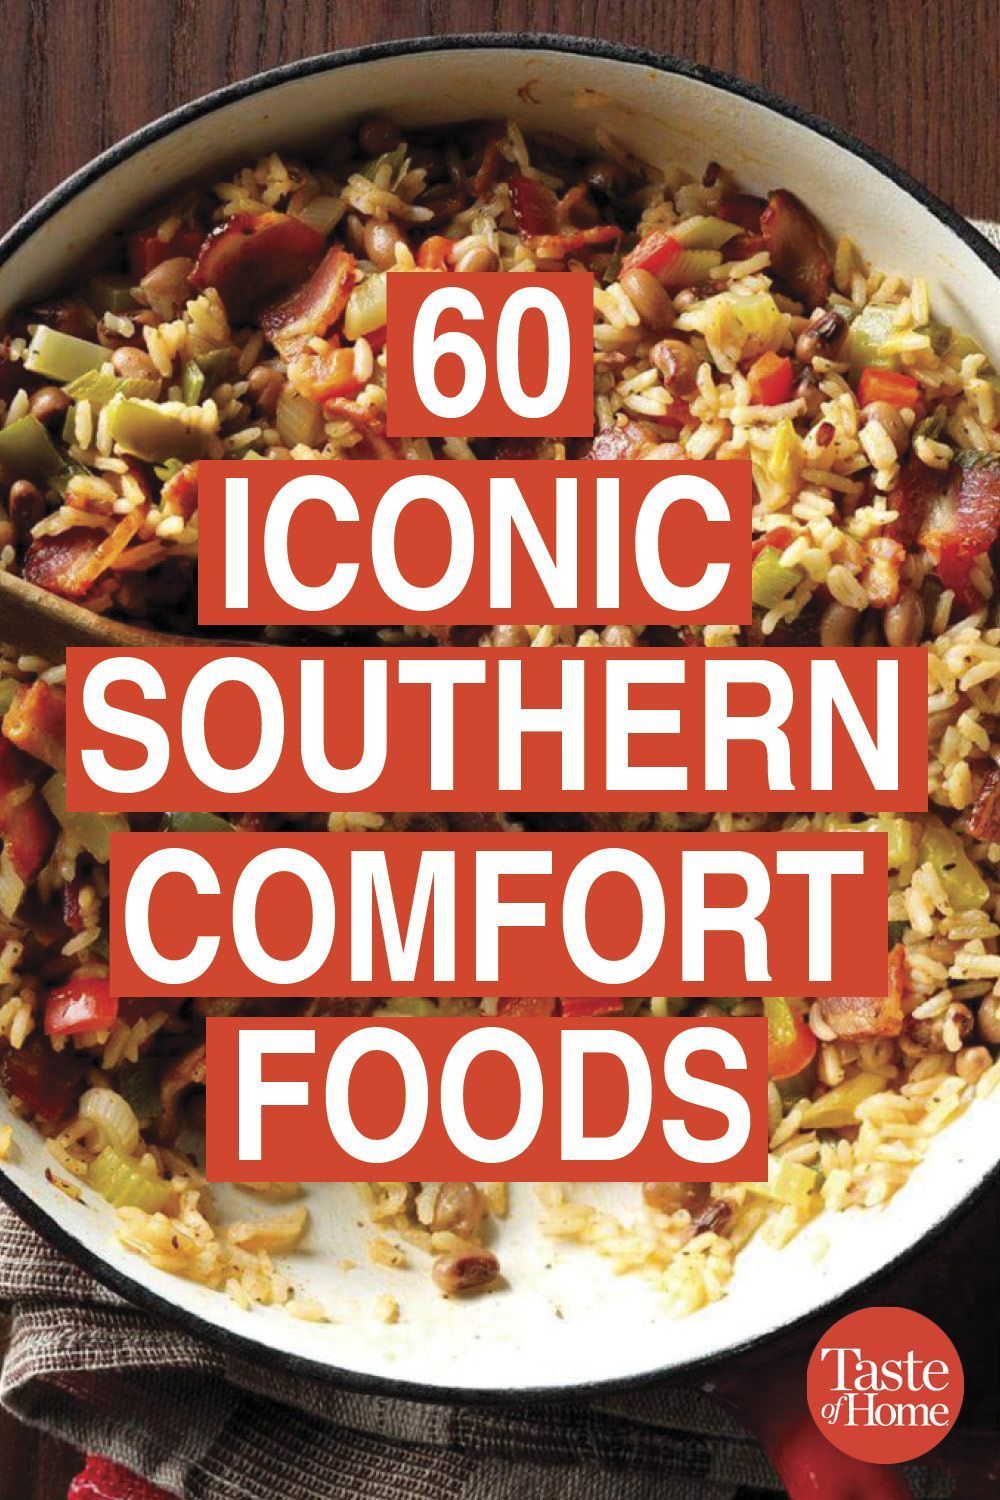 60 Iconic Southern Comfort Foods HD Wallpaper